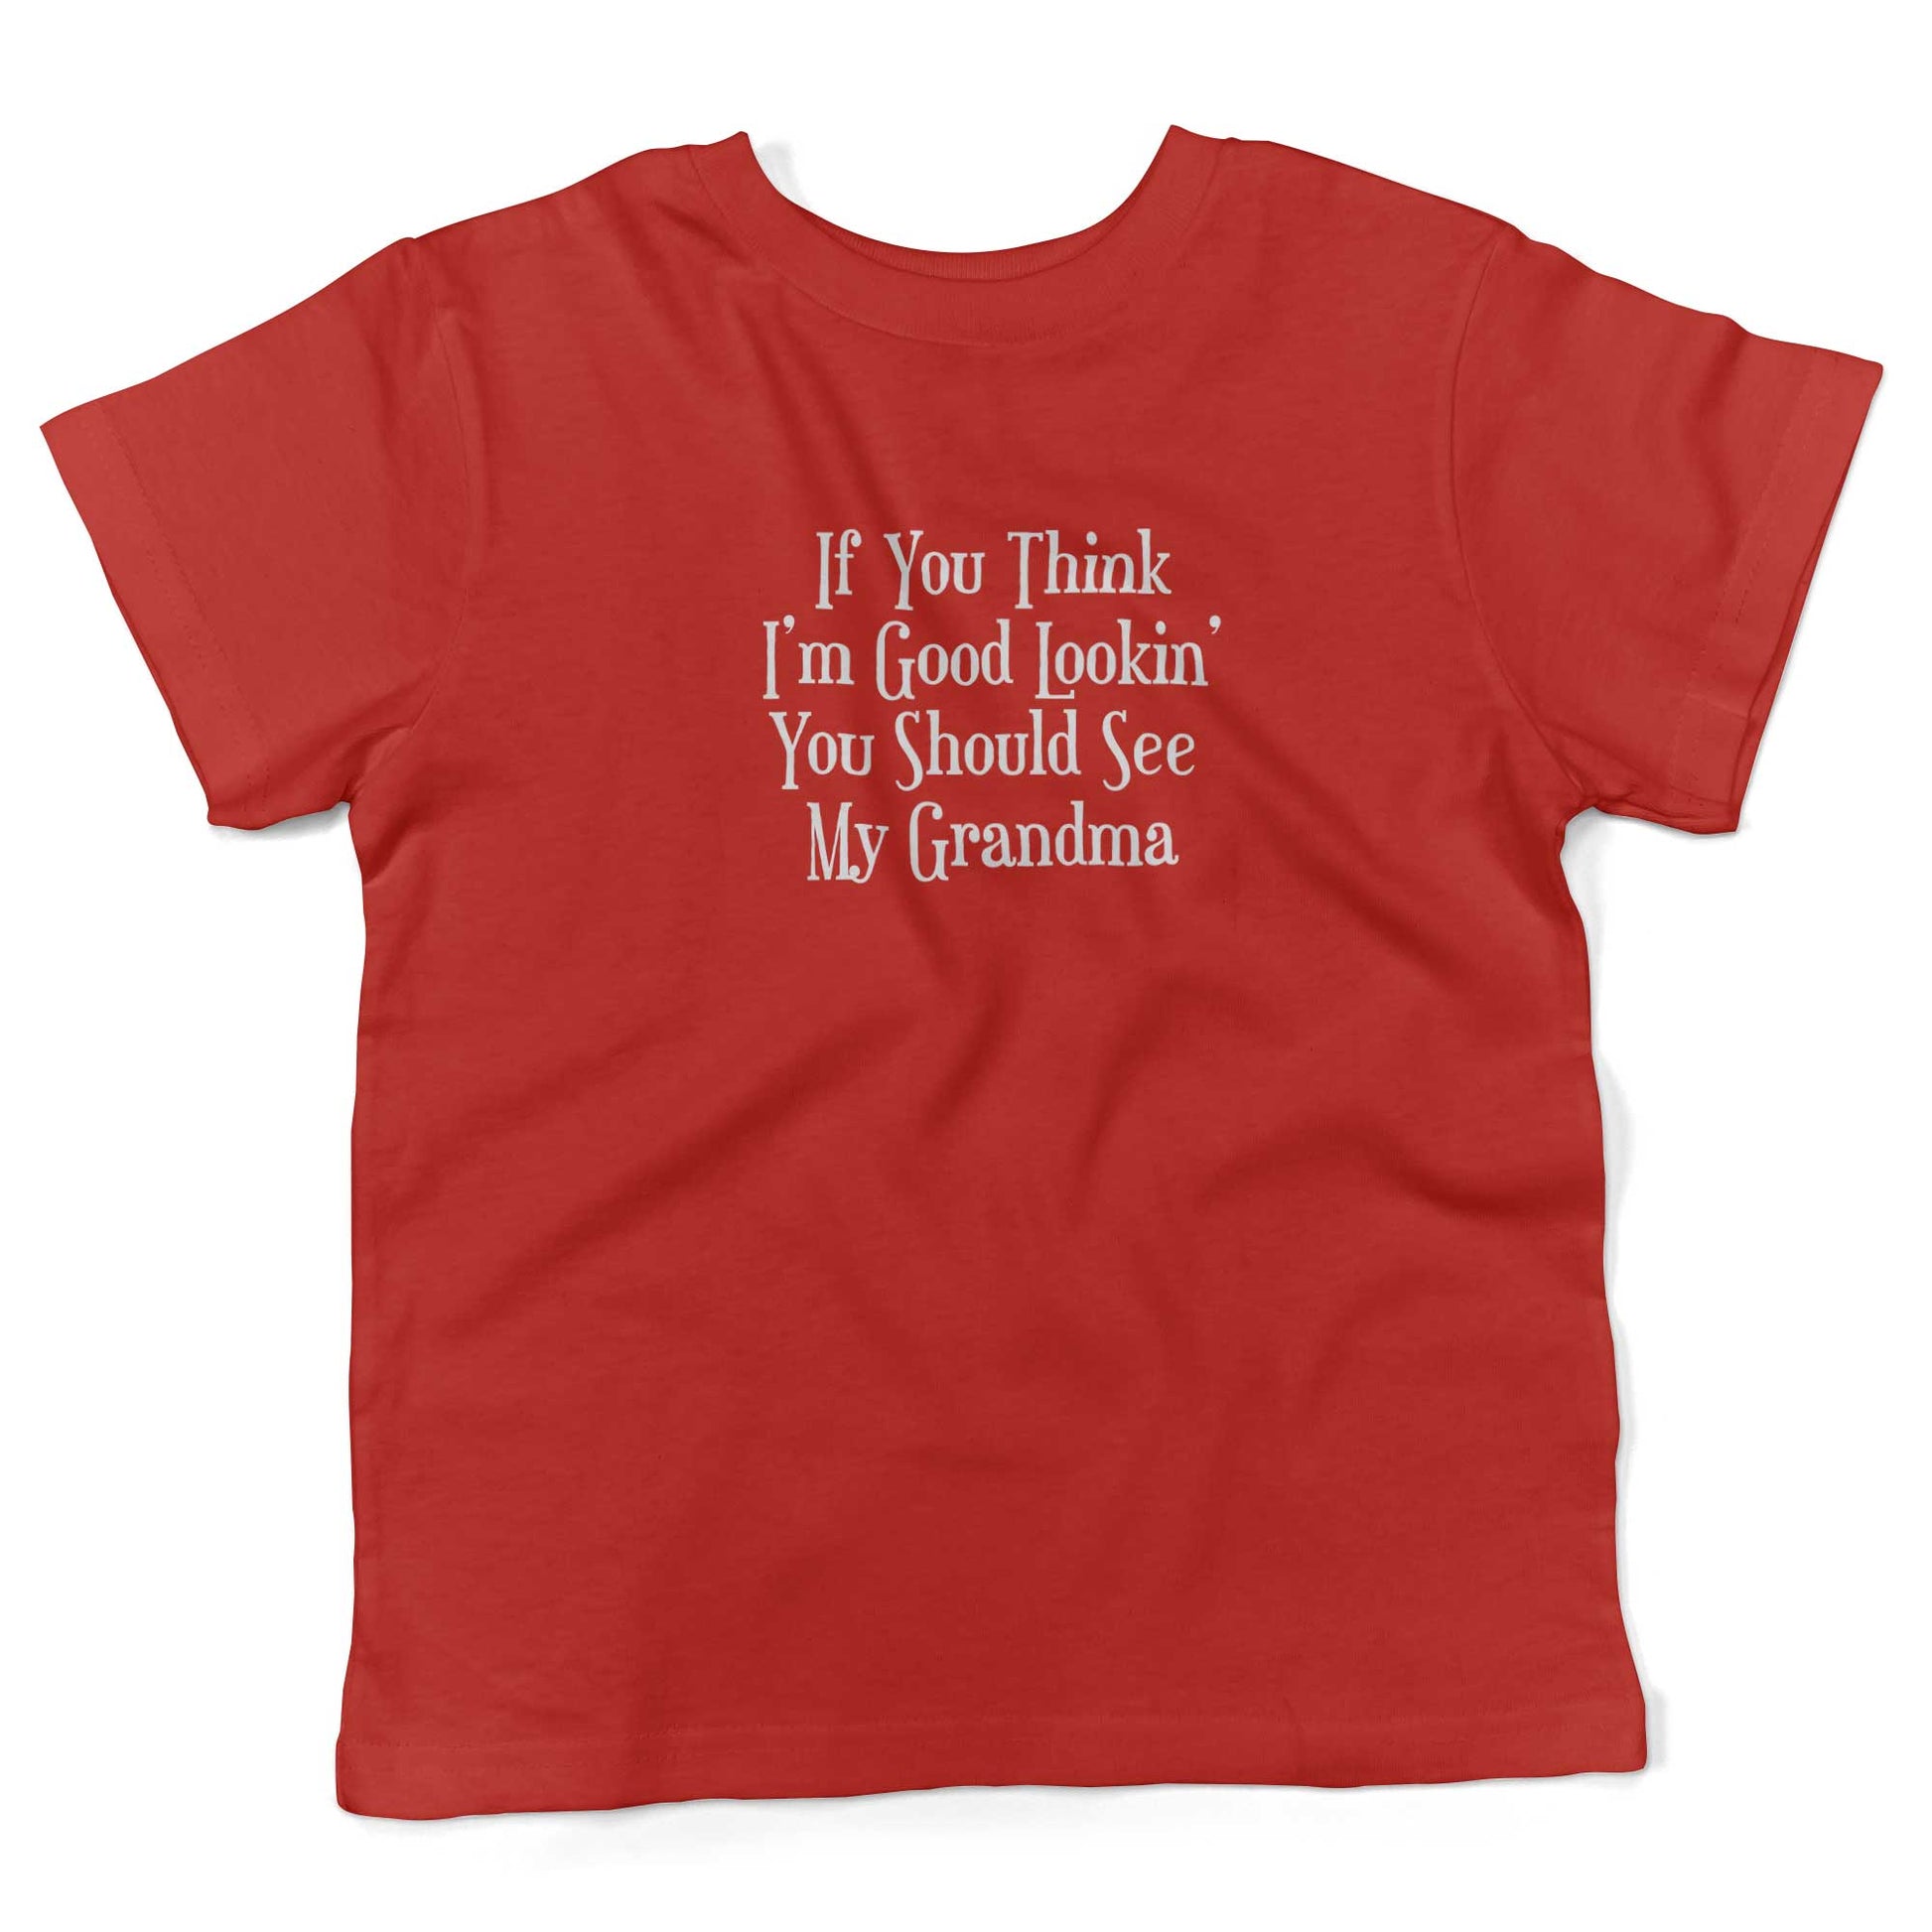 If You Think I'm Good Lookin', You Should See My Grandma Toddler Shirt-Red-2T